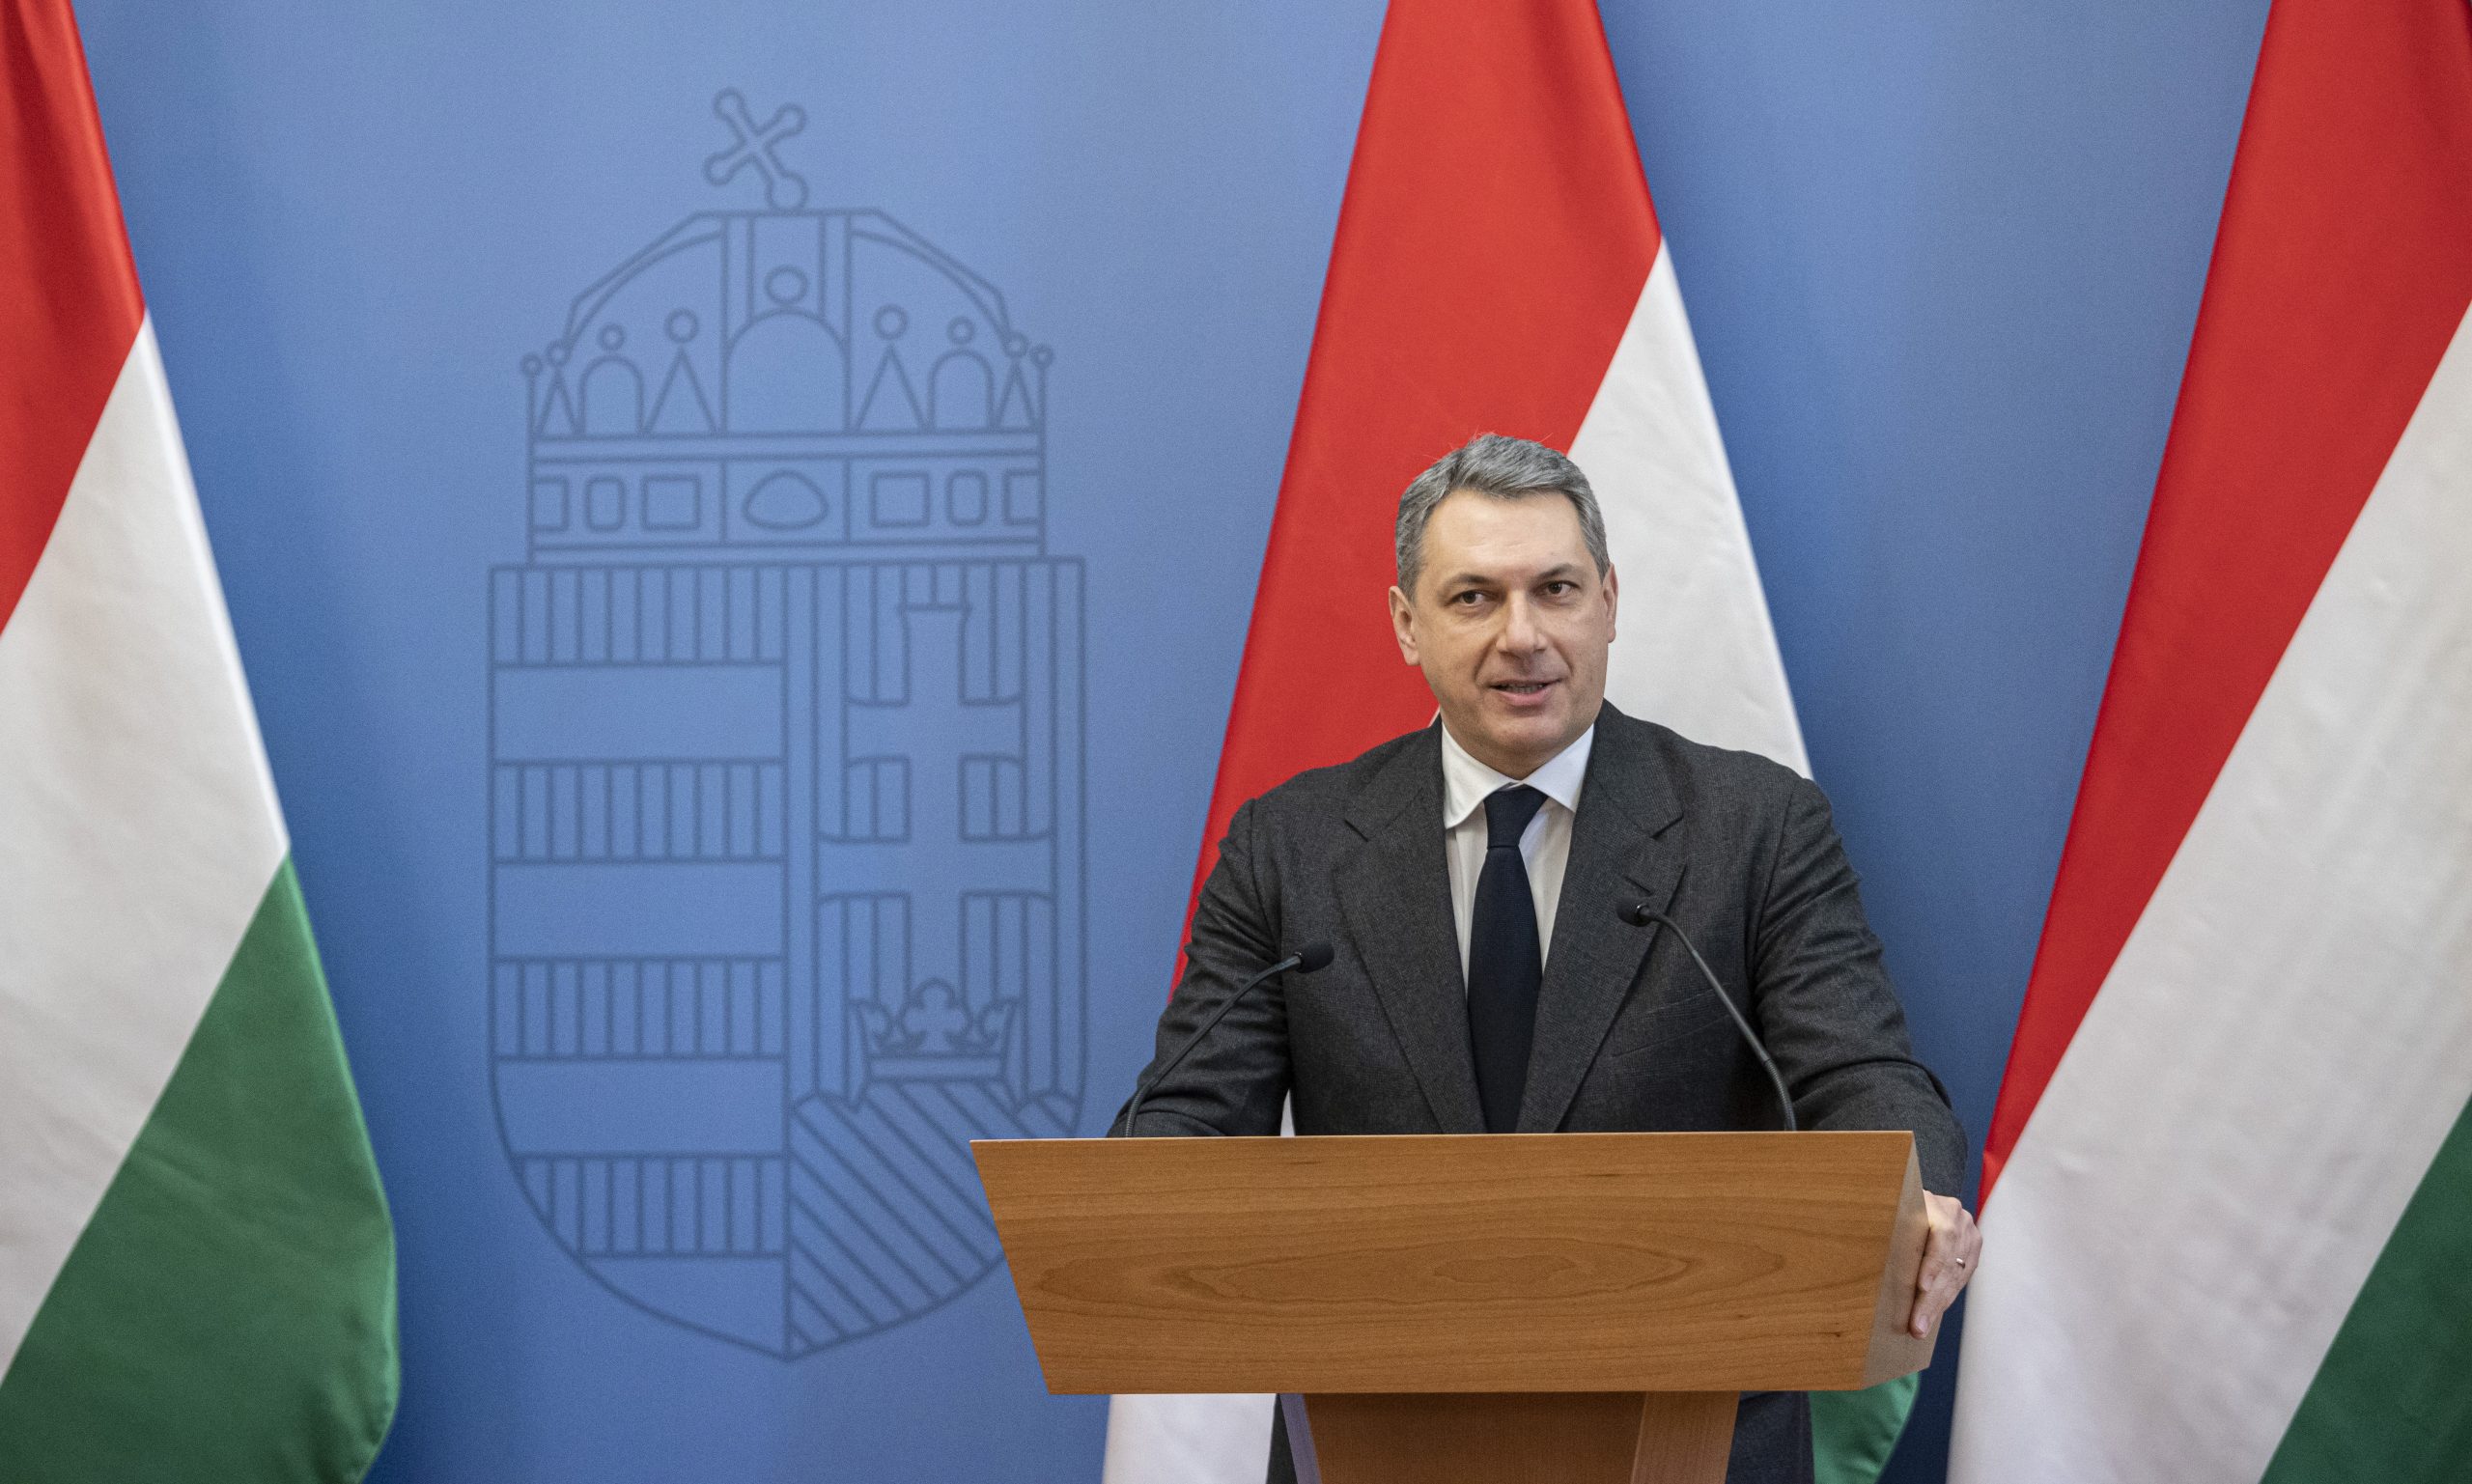 Fidesz's Lázár Wants Foreign Discounters to be Replaced by Hungarian Ones